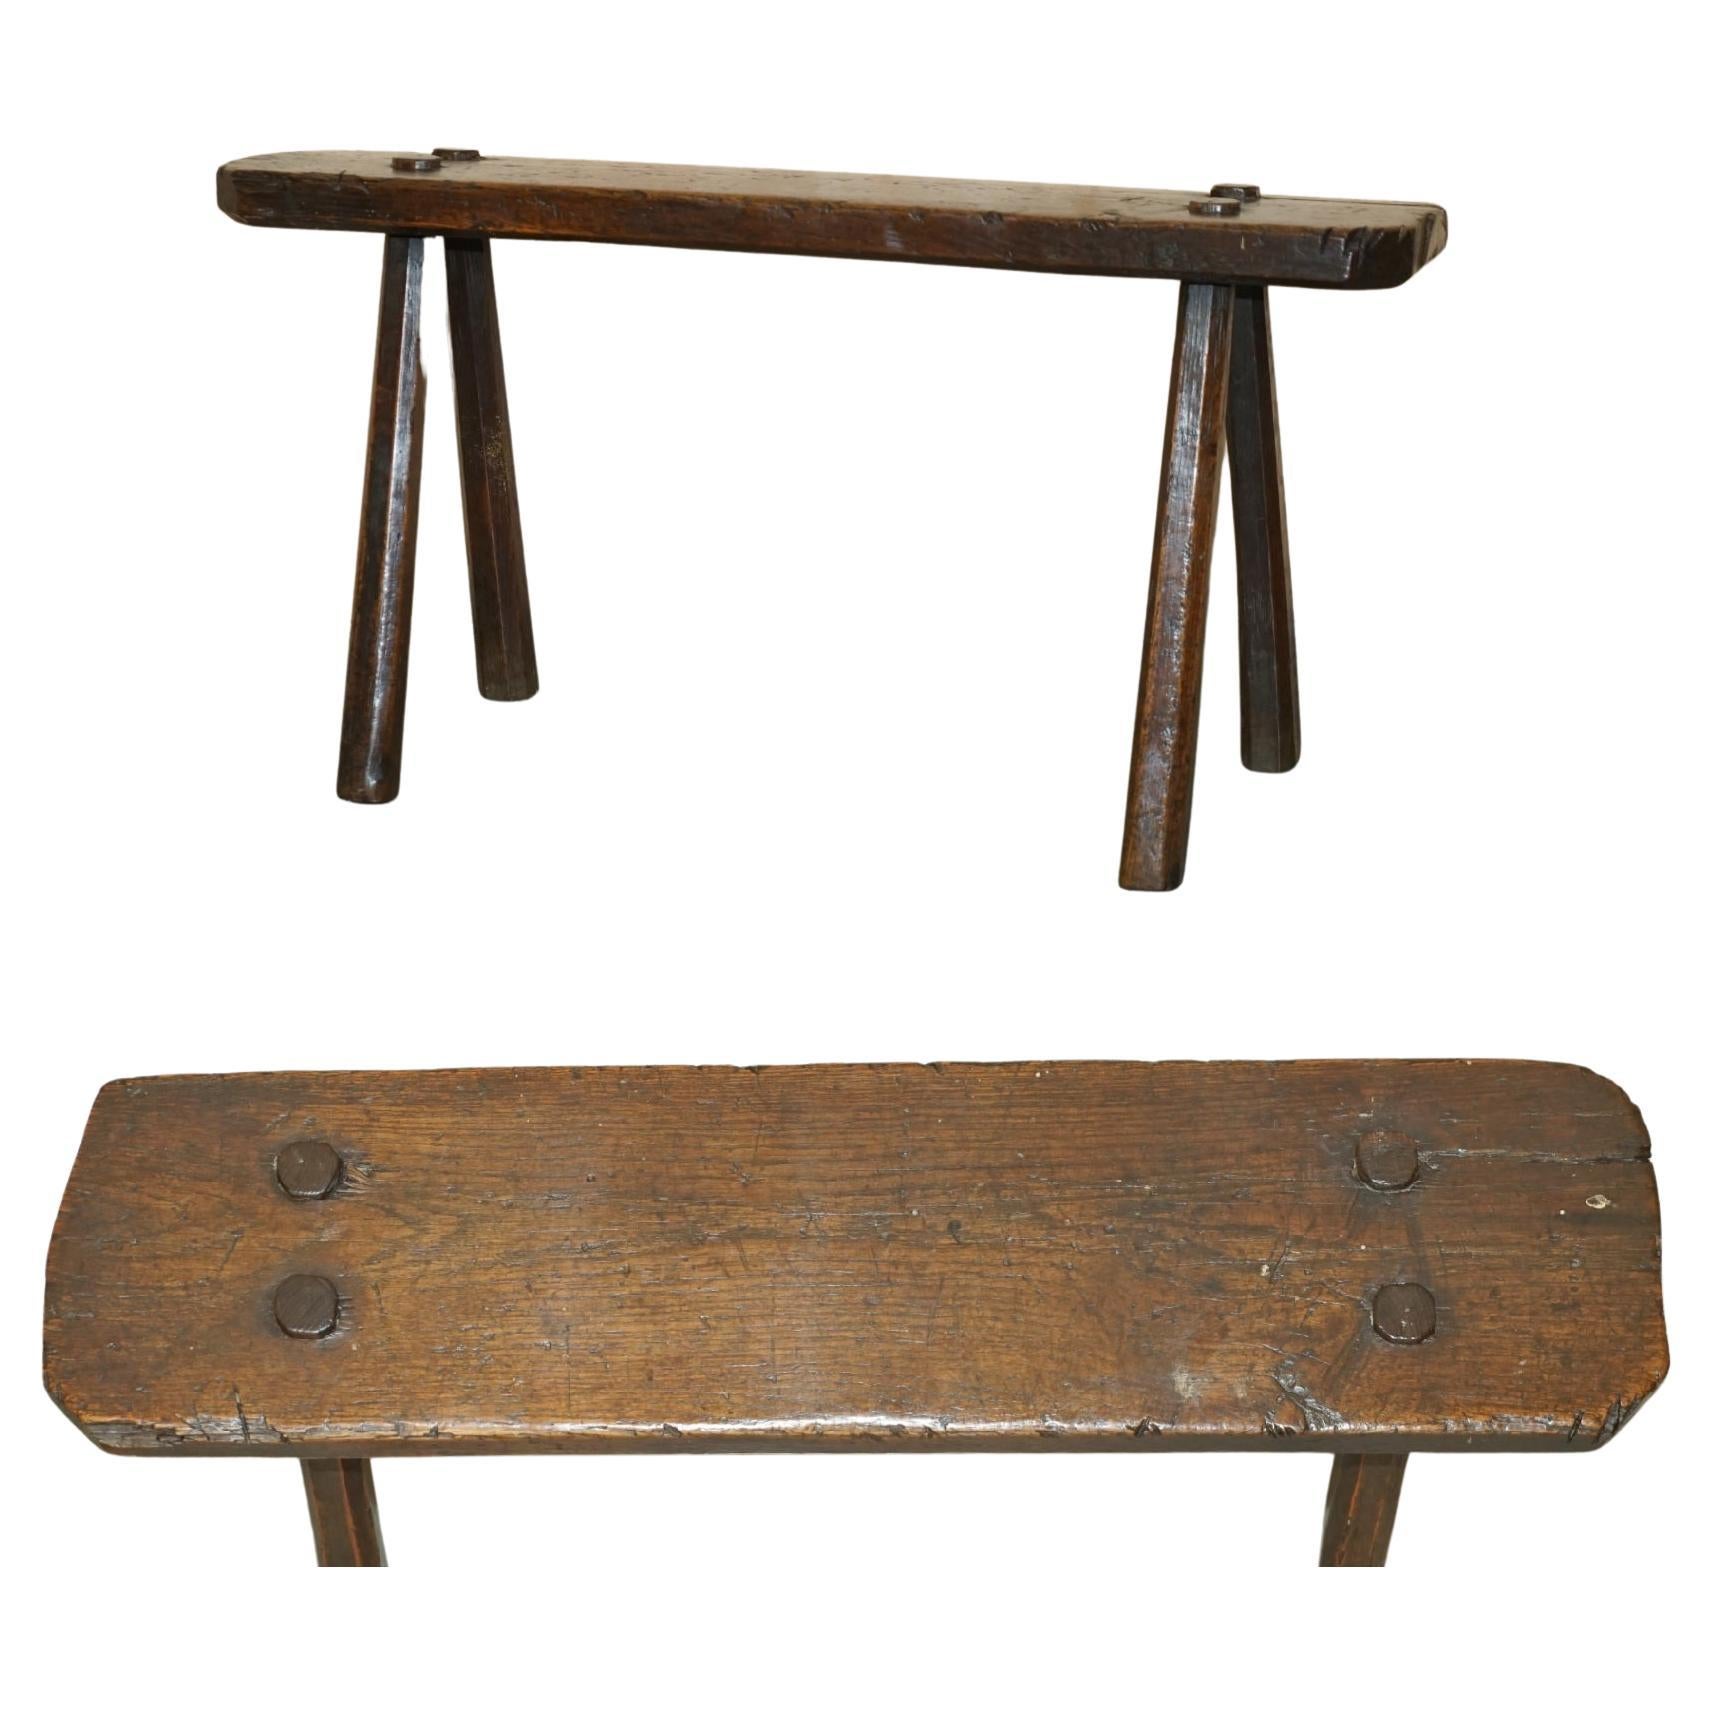 PRIMITIVE ANTiQUE 1800 SPANISH 18TH CENTURY FOUR LEGGED BENCH OR COFFEE TABLE For Sale